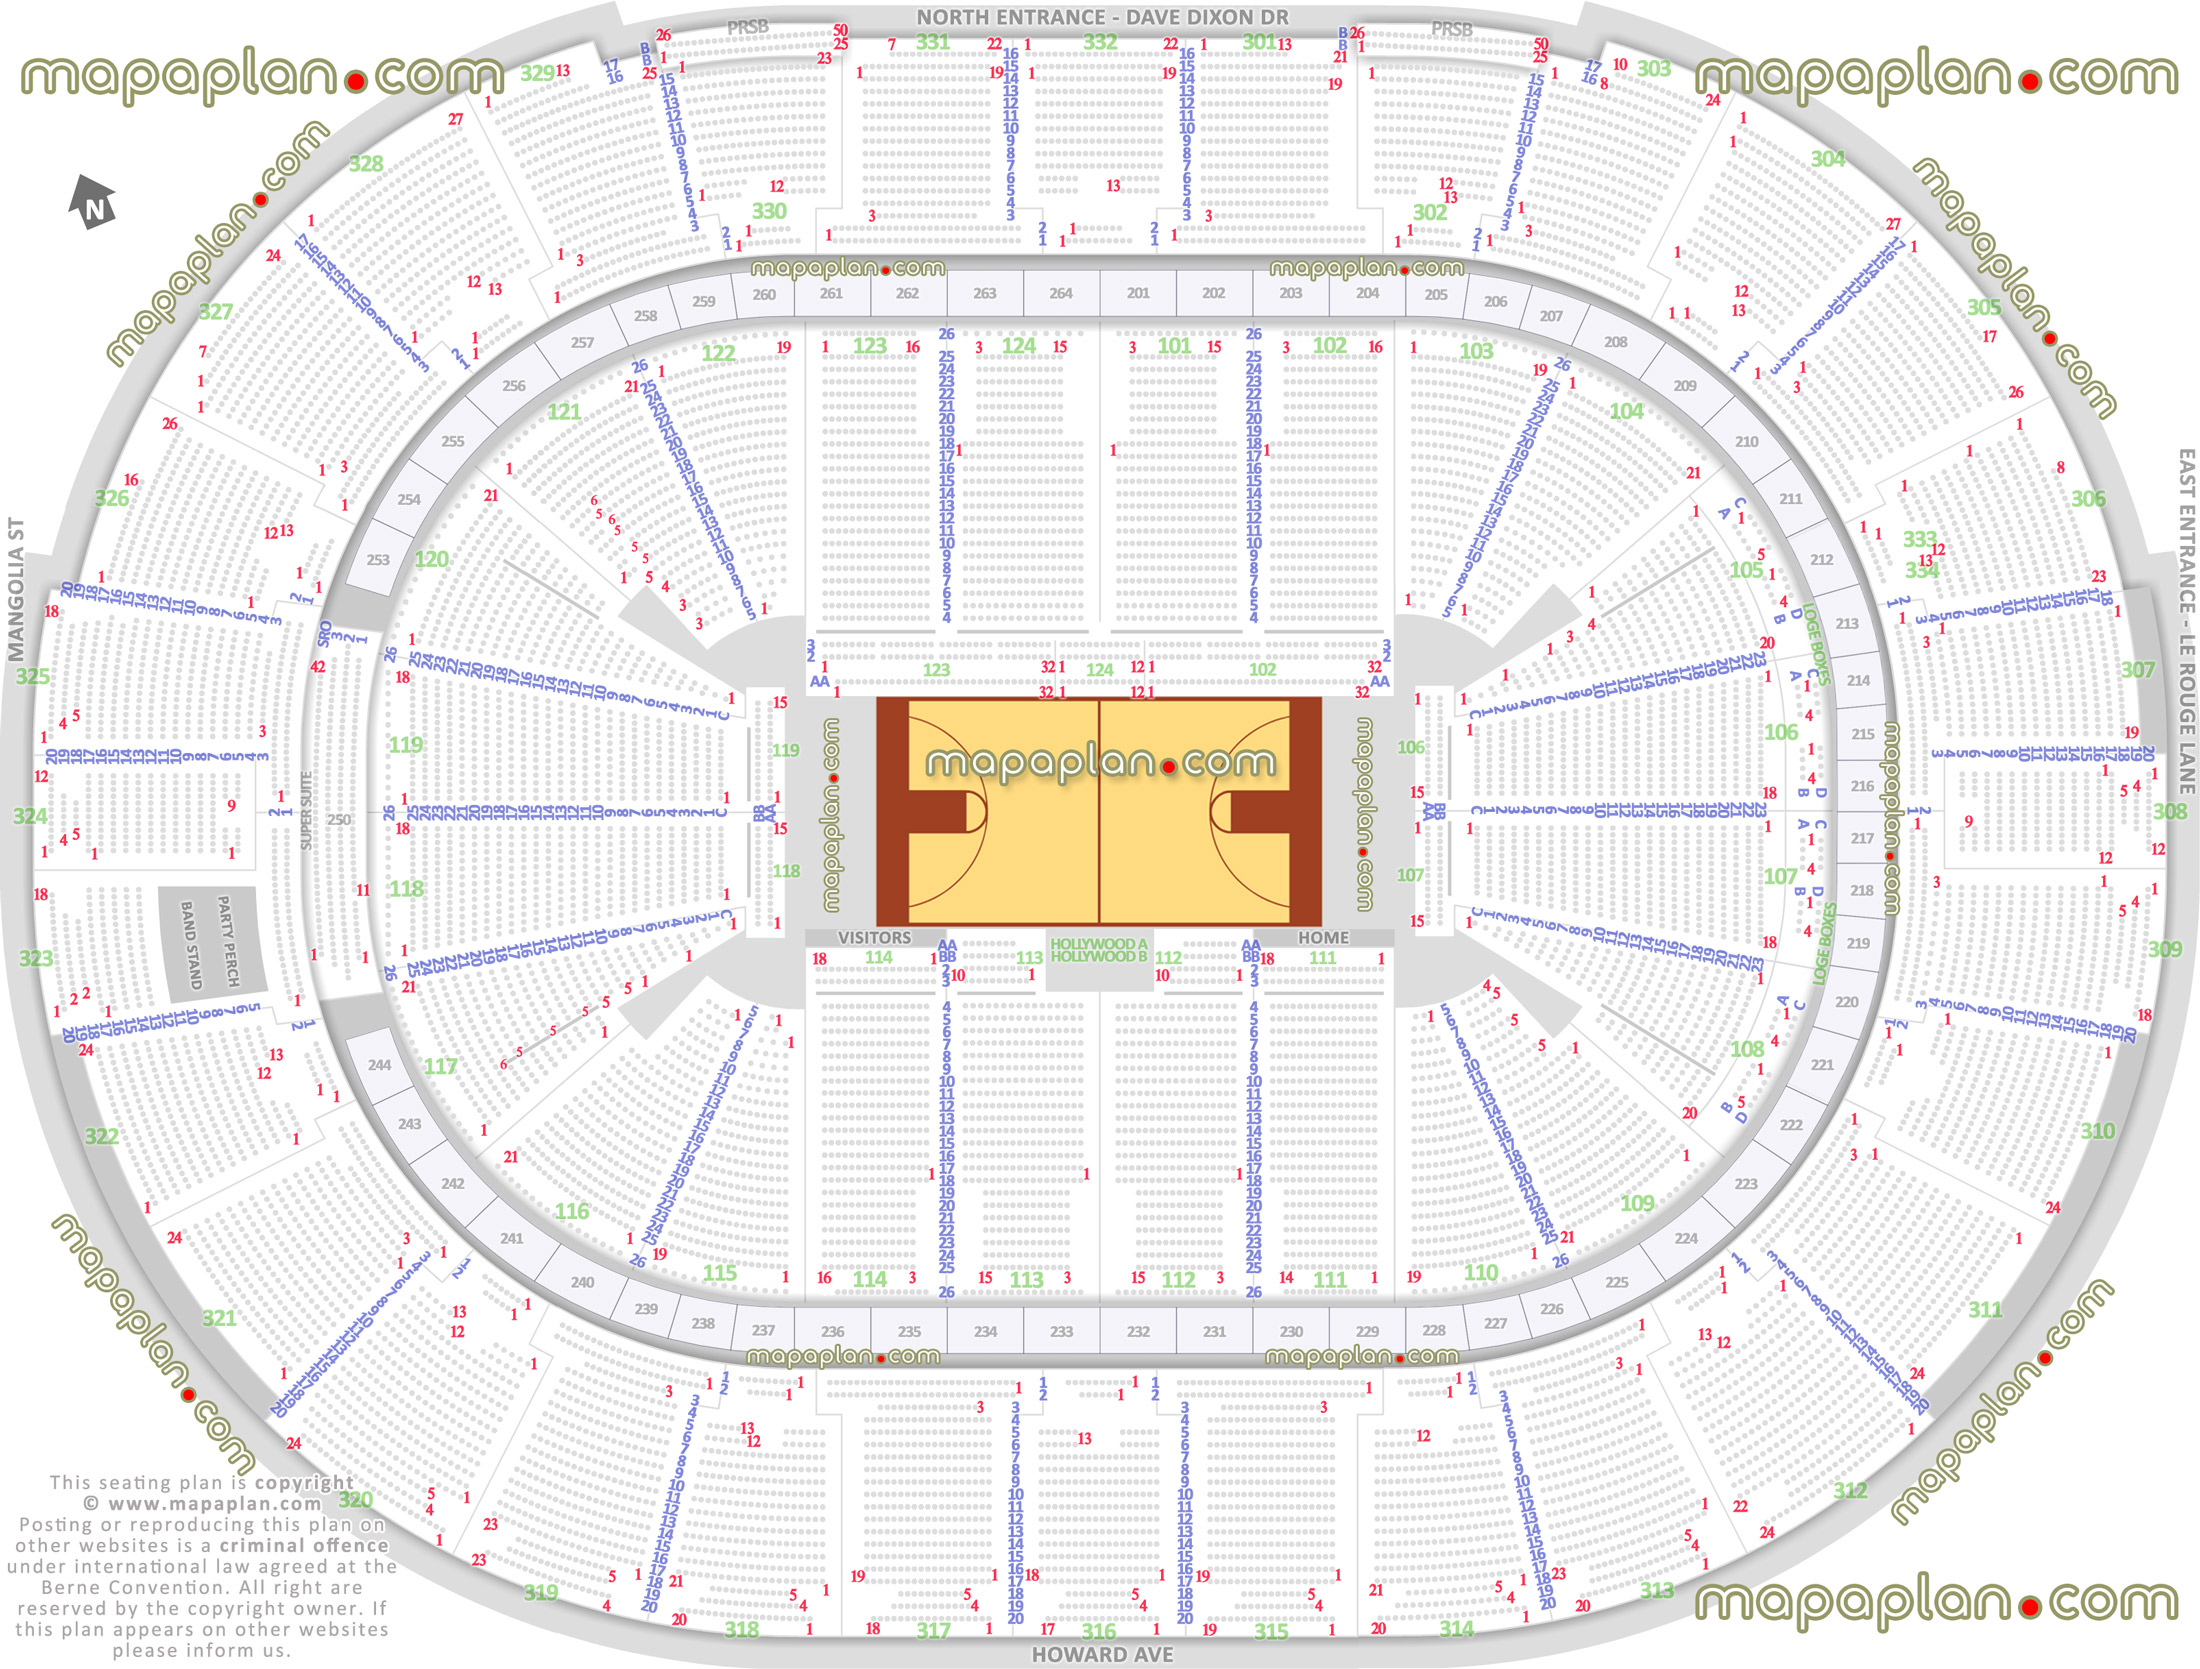 basketball plan new orleans pelicans nba ncaa tournament games arena stadium diagram individual find seat locator seats row best seats rows numbered lower upper balcony club level sections 101 102 103 104 105 106 107 108 109 110 111 112 113 114 115 116 117 118 119 120 121 122 123 124 New Orleans Smoothie King Center arena seating chart